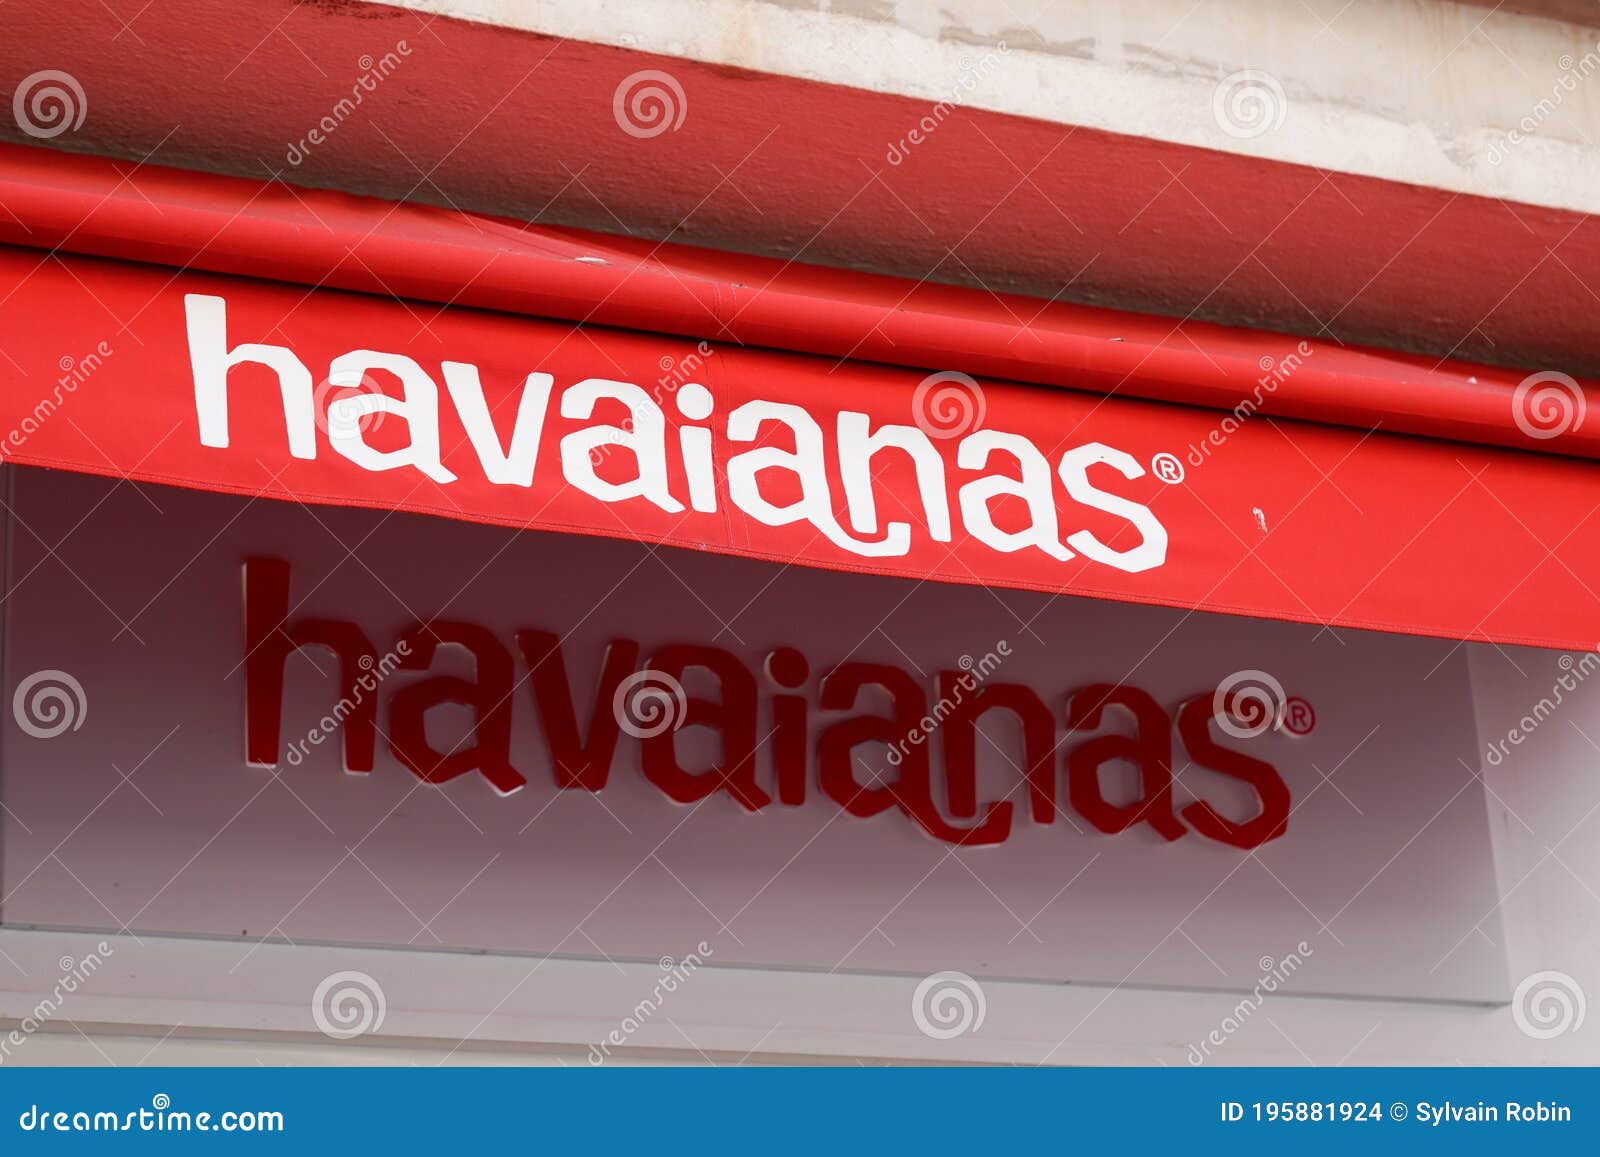 Havaianas Logo and Text Sign Outside of Store of Brazilian Brand of  Flip-flop Sandals Editorial Stock Image - Image of brand, sign: 195881924